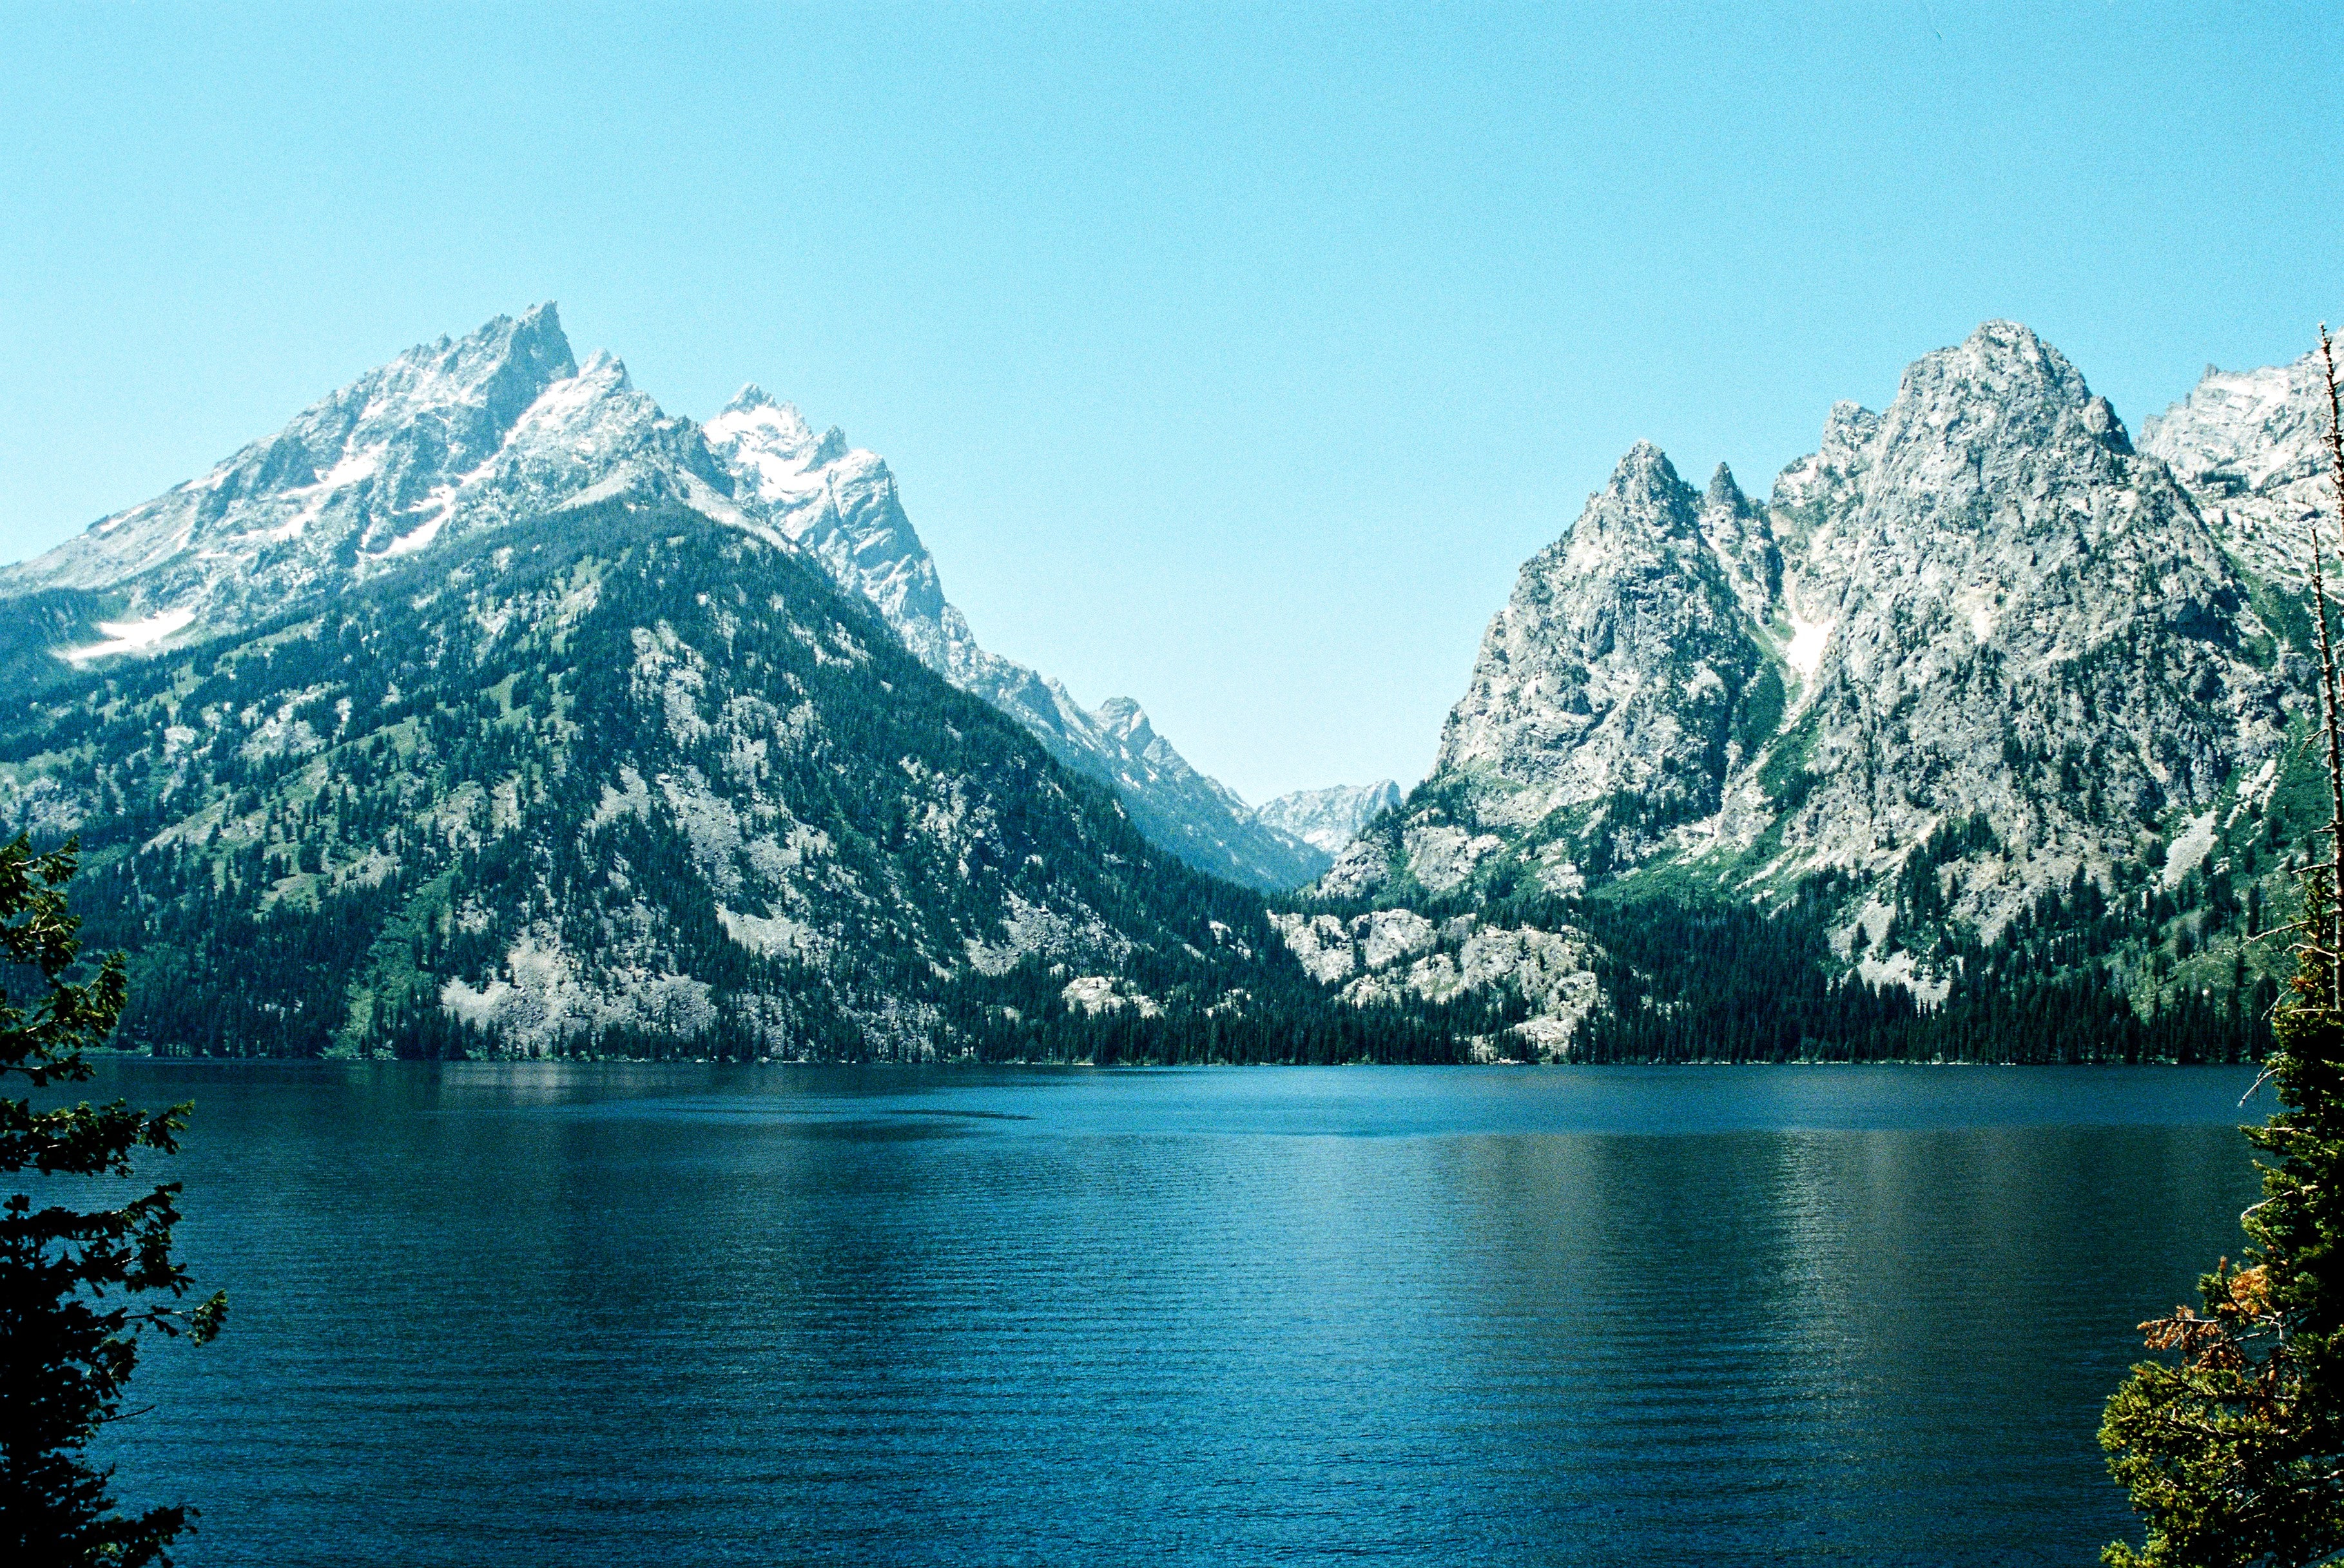 Jagged mountains with snowy peaks and alpine trees over a vivid blue lake in Grand Teton National Park